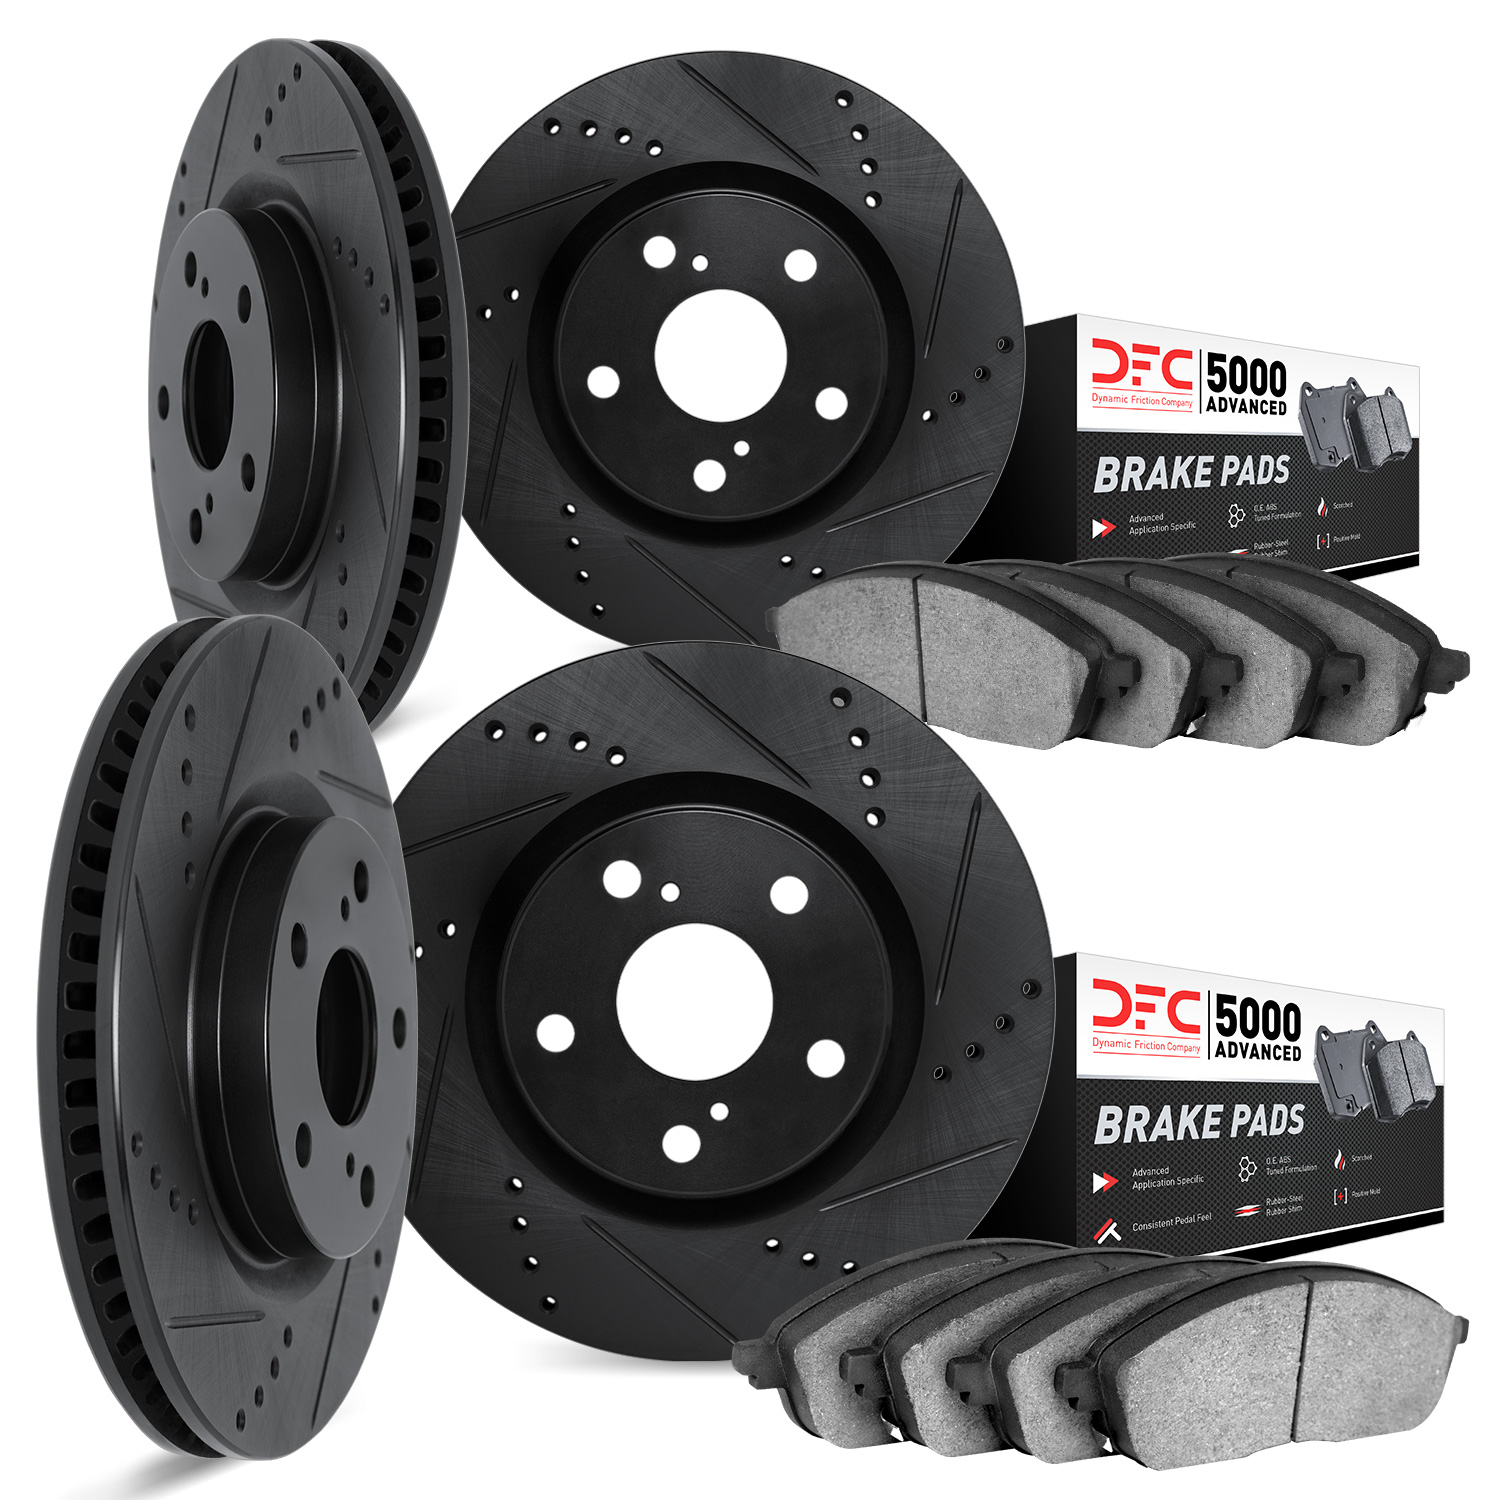 8504-27004 Drilled/Slotted Brake Rotors w/5000 Advanced Brake Pads Kit [Black], 2004-2007 Volvo, Position: Front and Rear